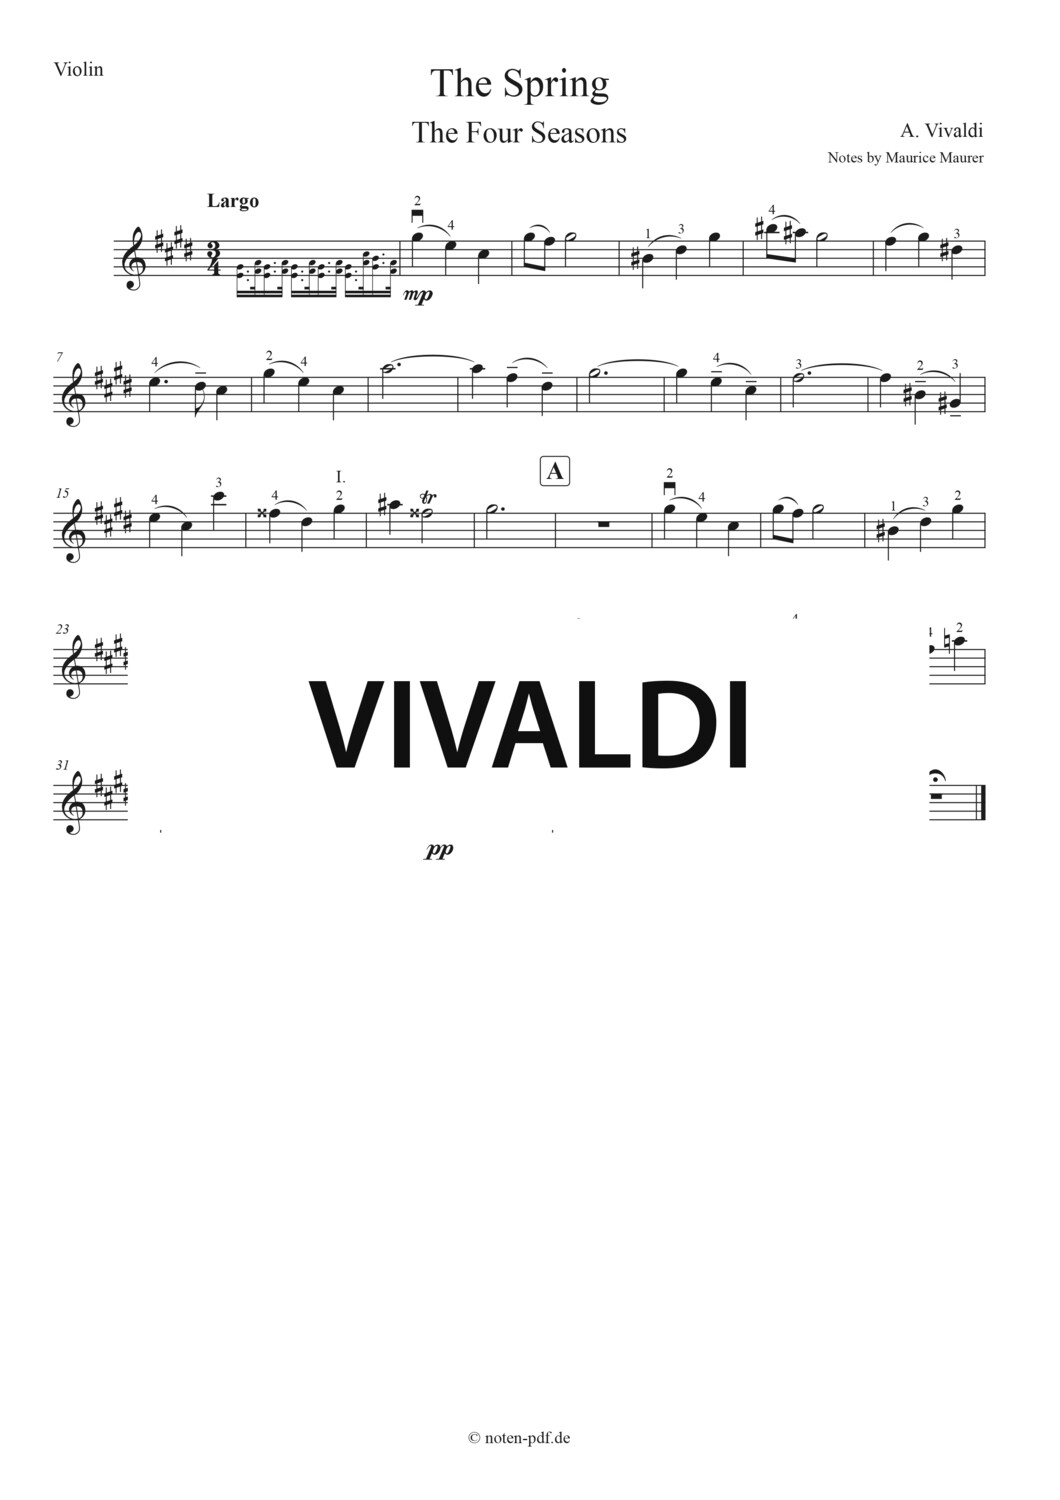 Vivaldi: The Spring from "The Four Seasons" - 2. Movement